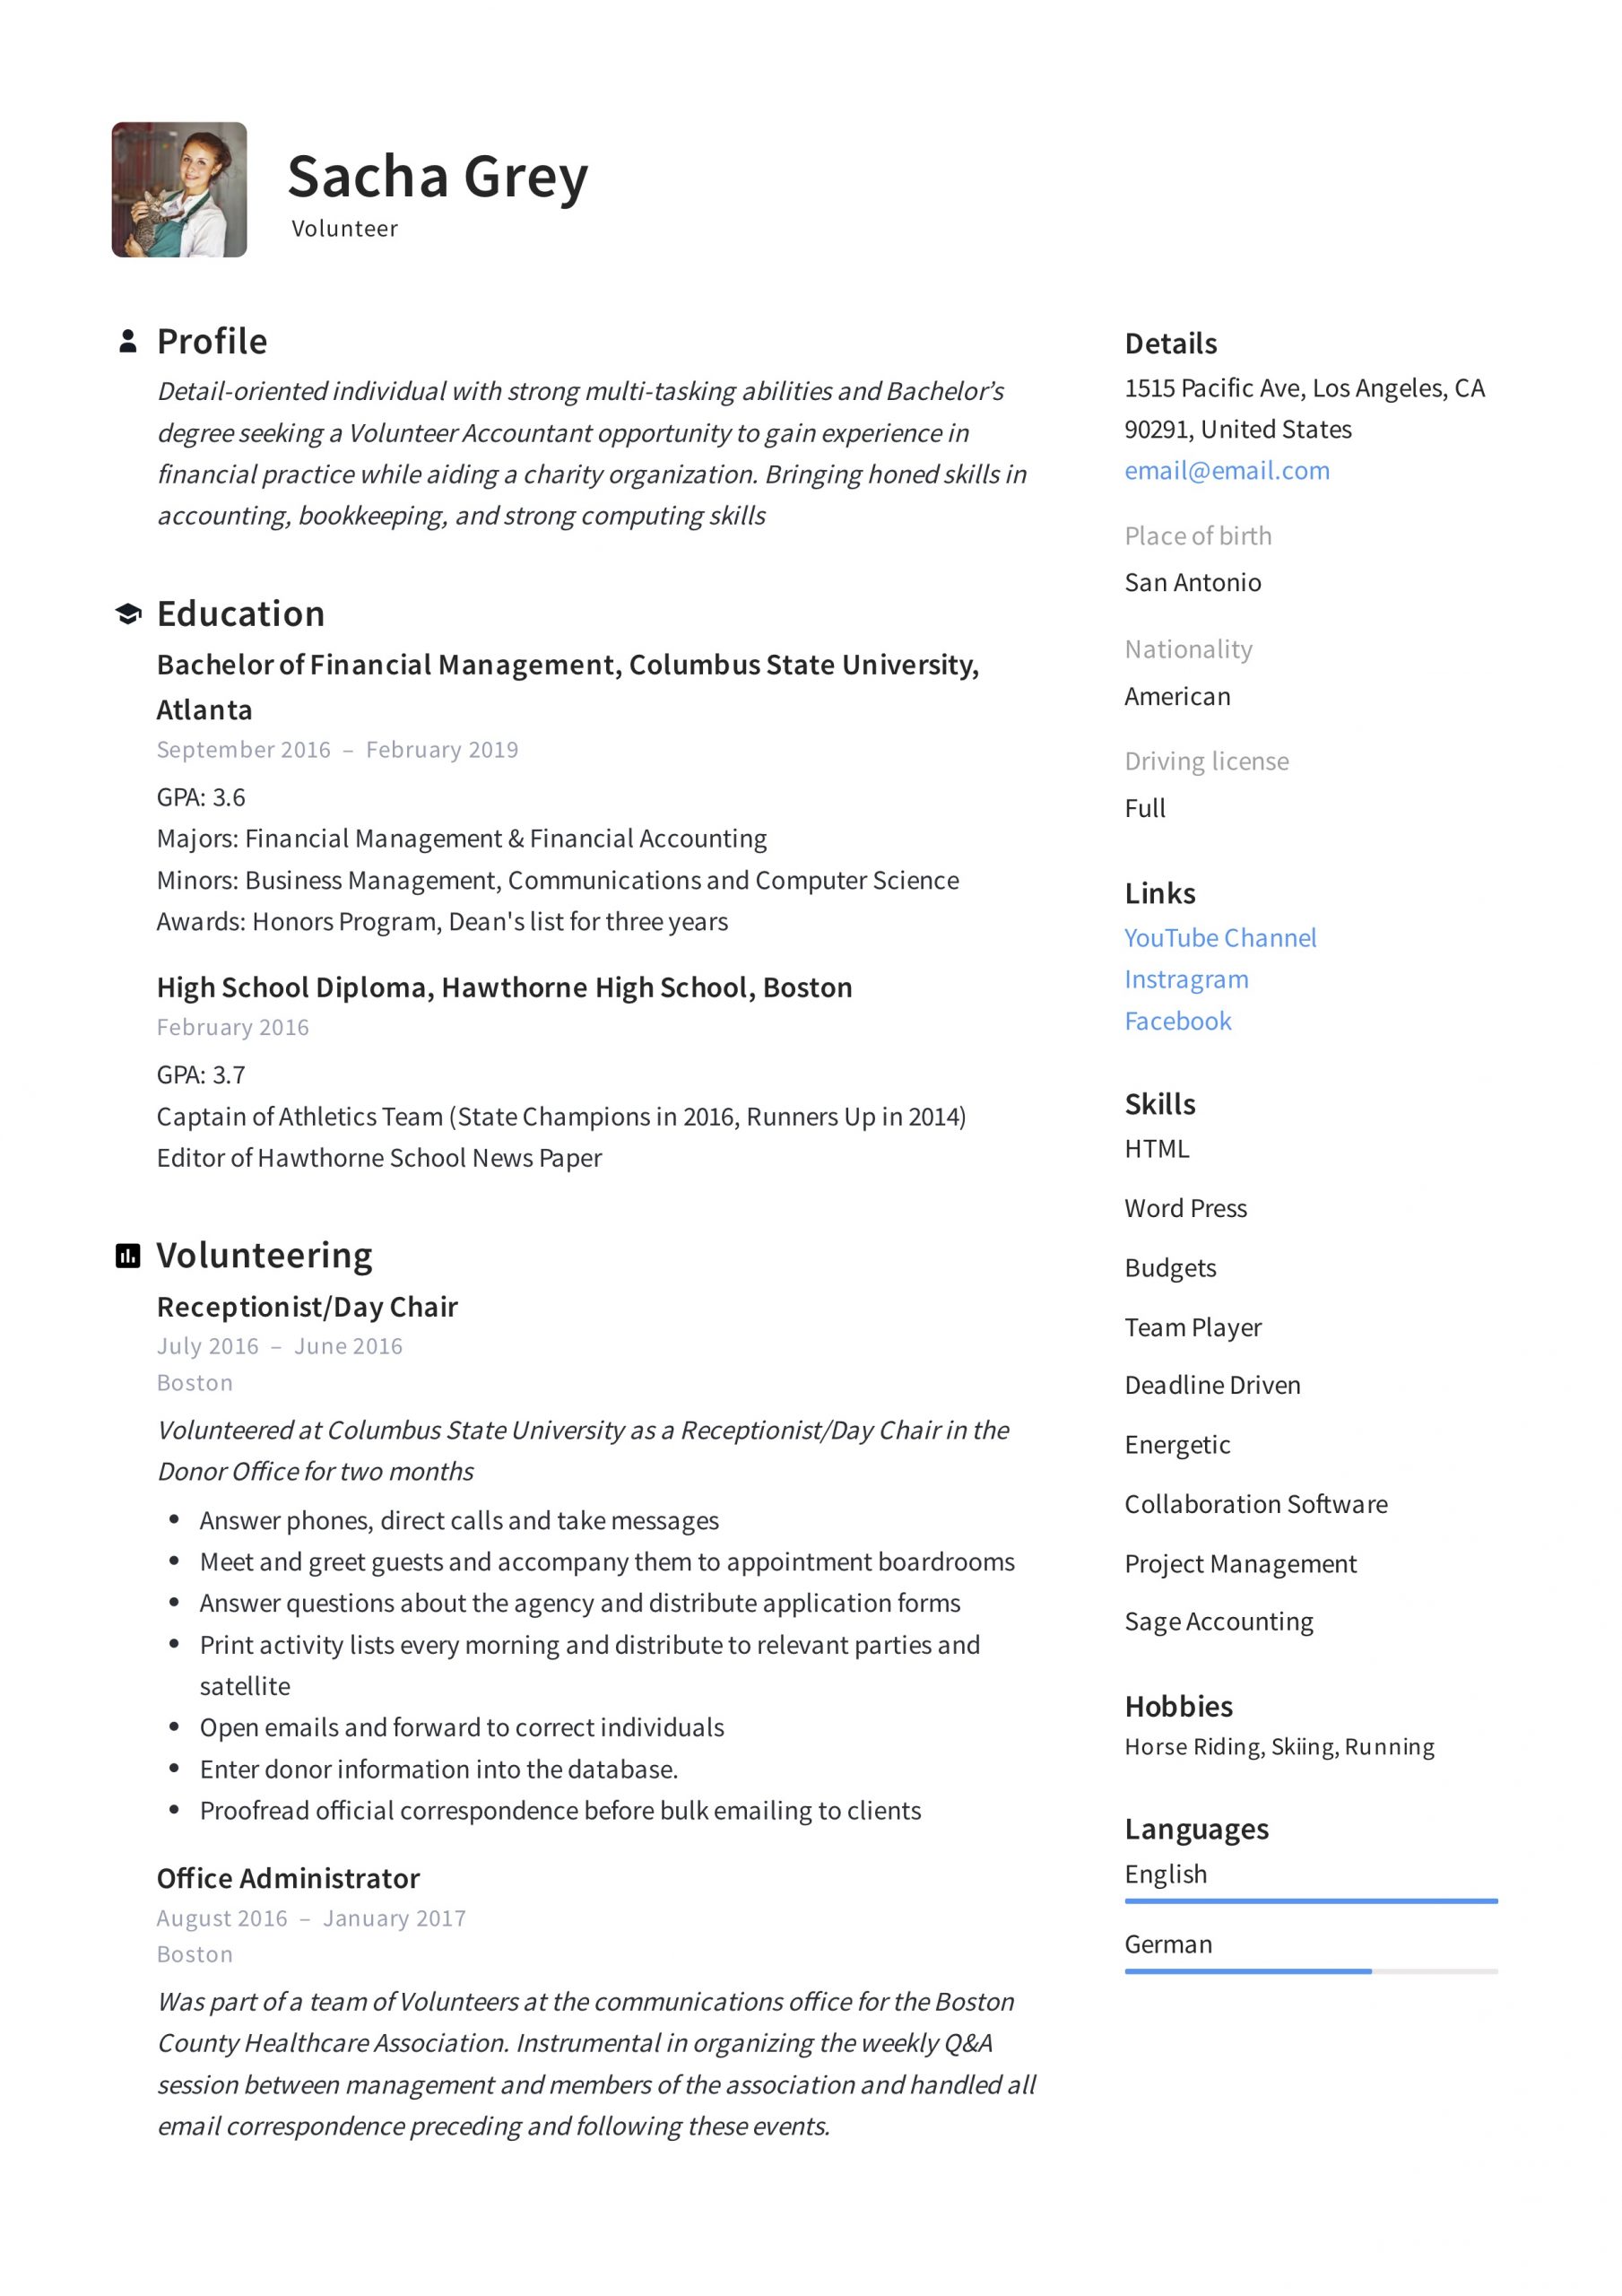 Volunteer Resume Sample Writing Guide Pdfs 2019 inside proportions 2478 X 3507